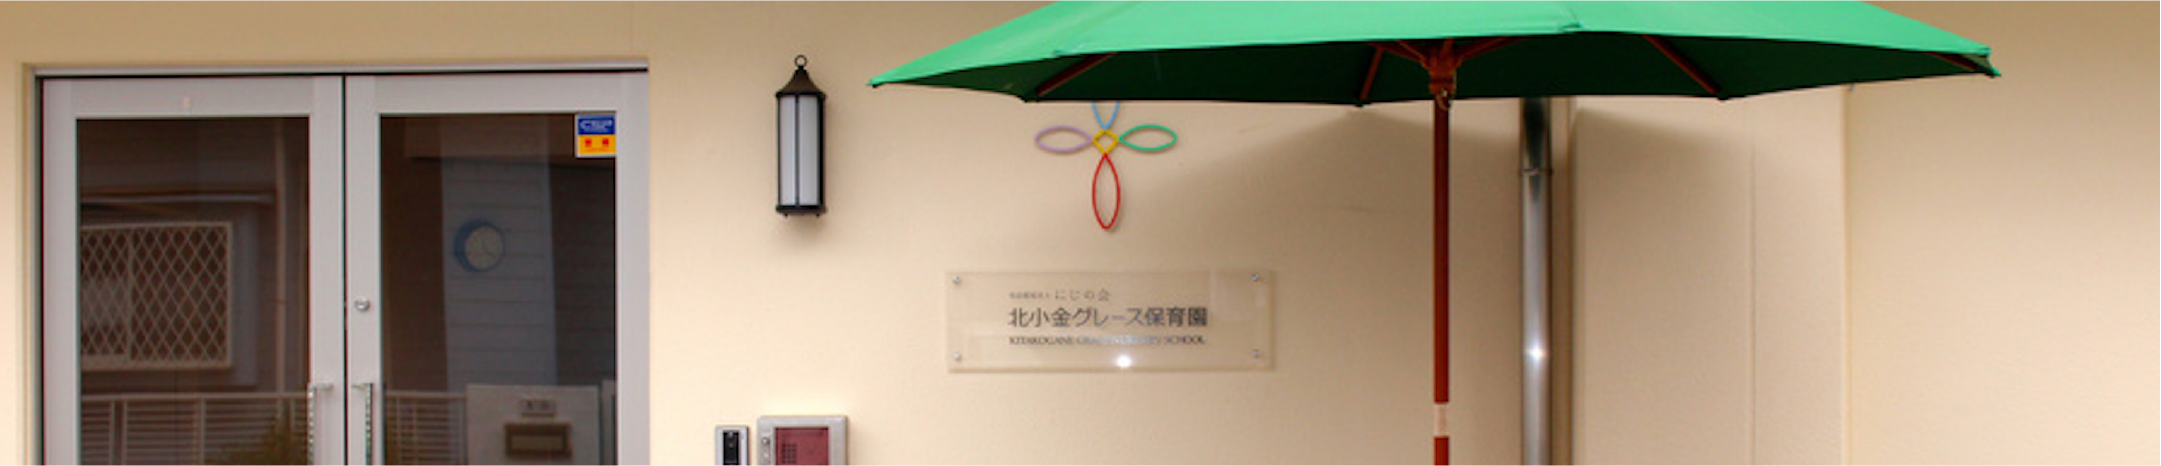 Center for Early Childhood Education and Care Kitakogane Grace